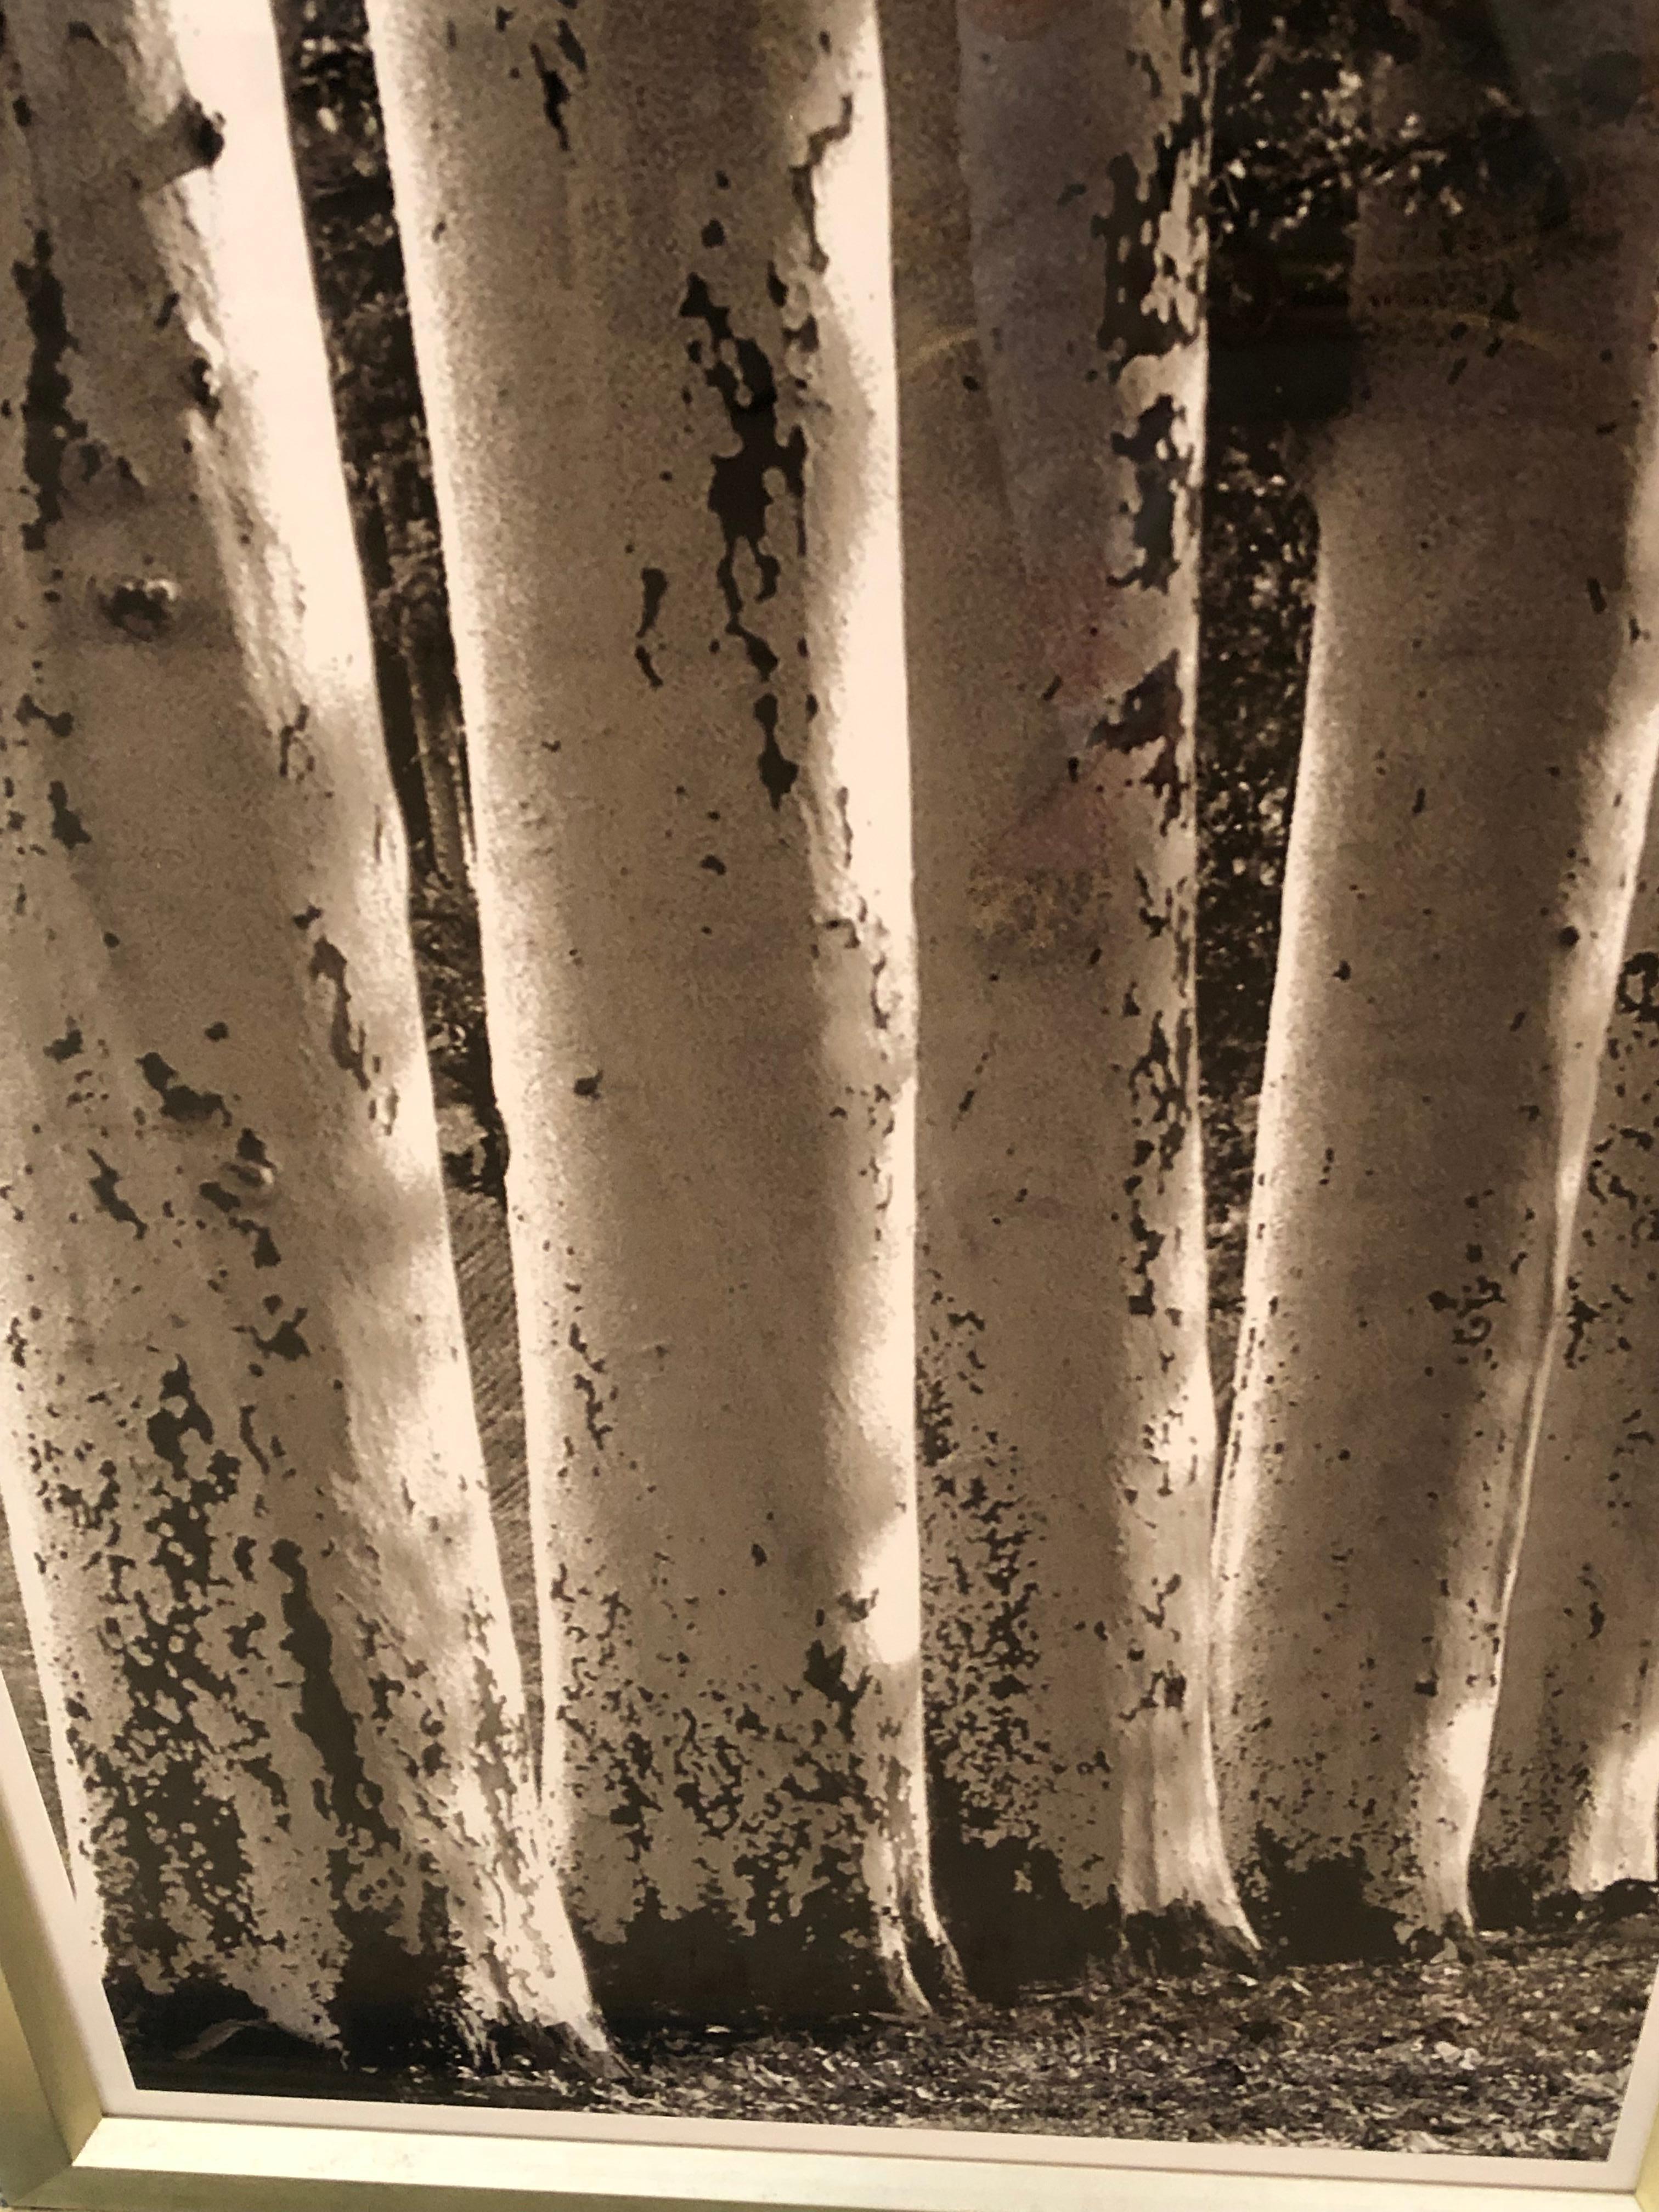 Monumental Striking 3 Panel Triptych Photograph of Birch Trees 2